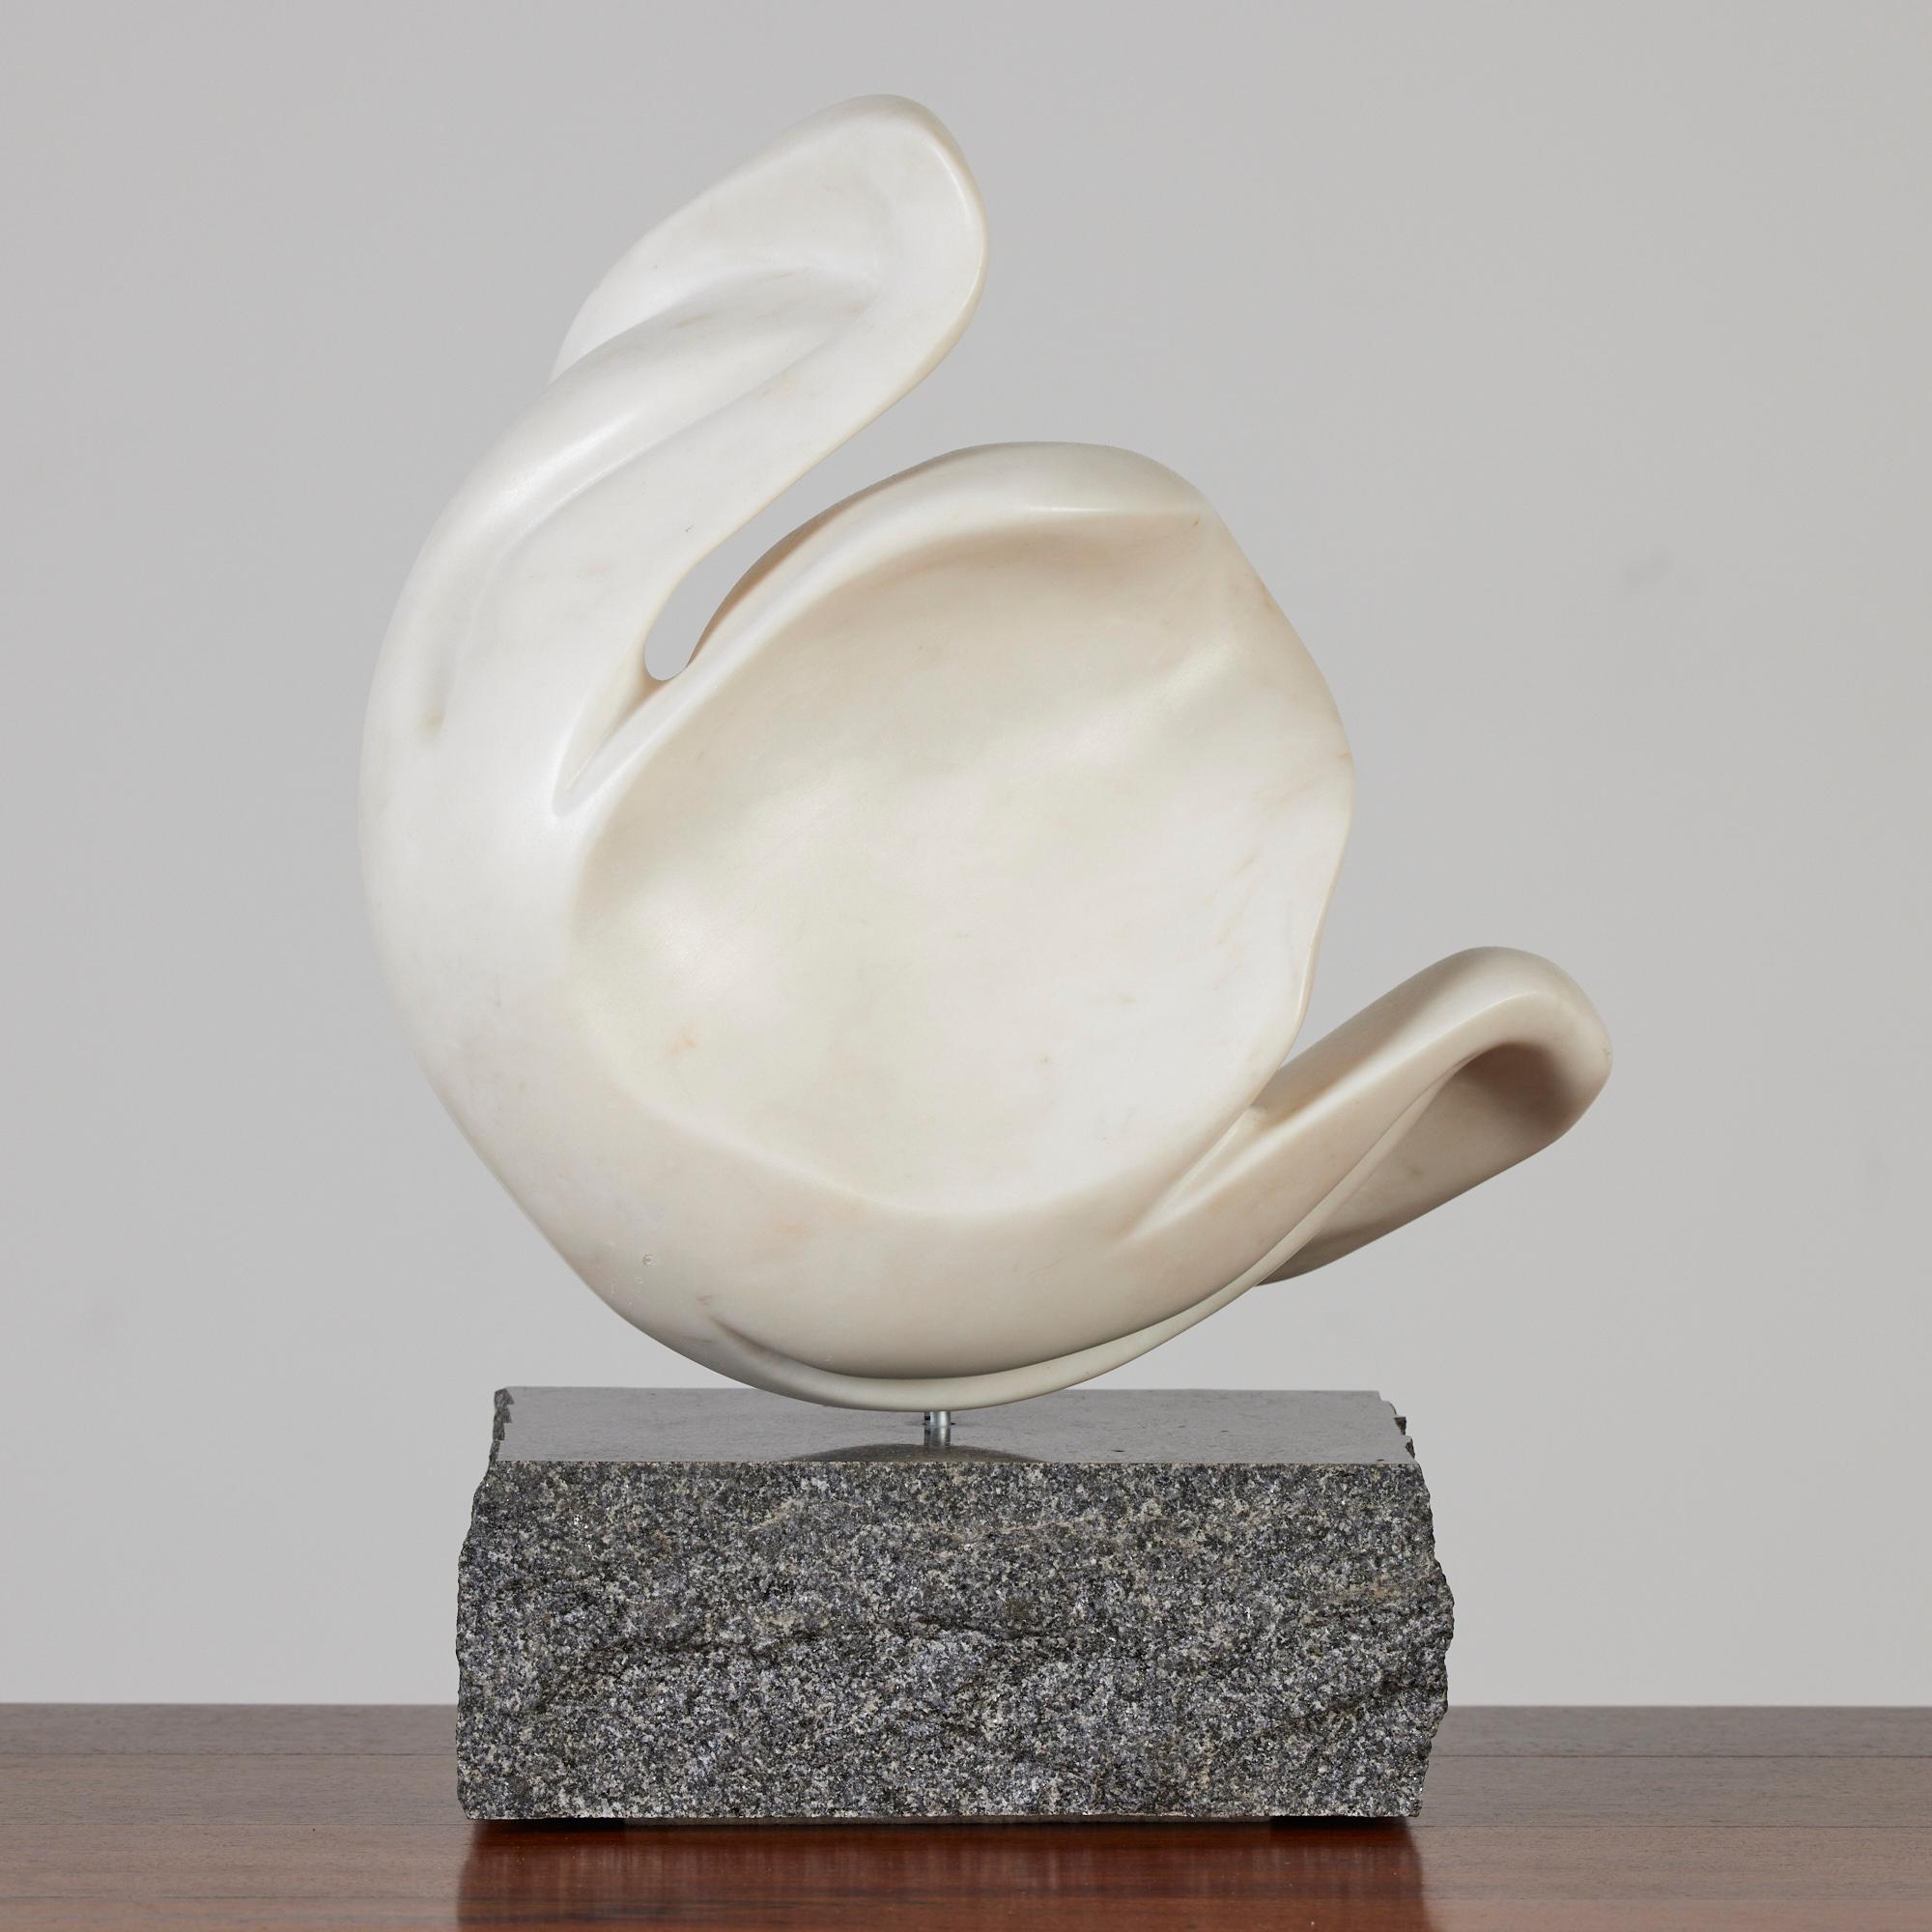 Polished Biomorphic Marble Sculpture with Granite Base